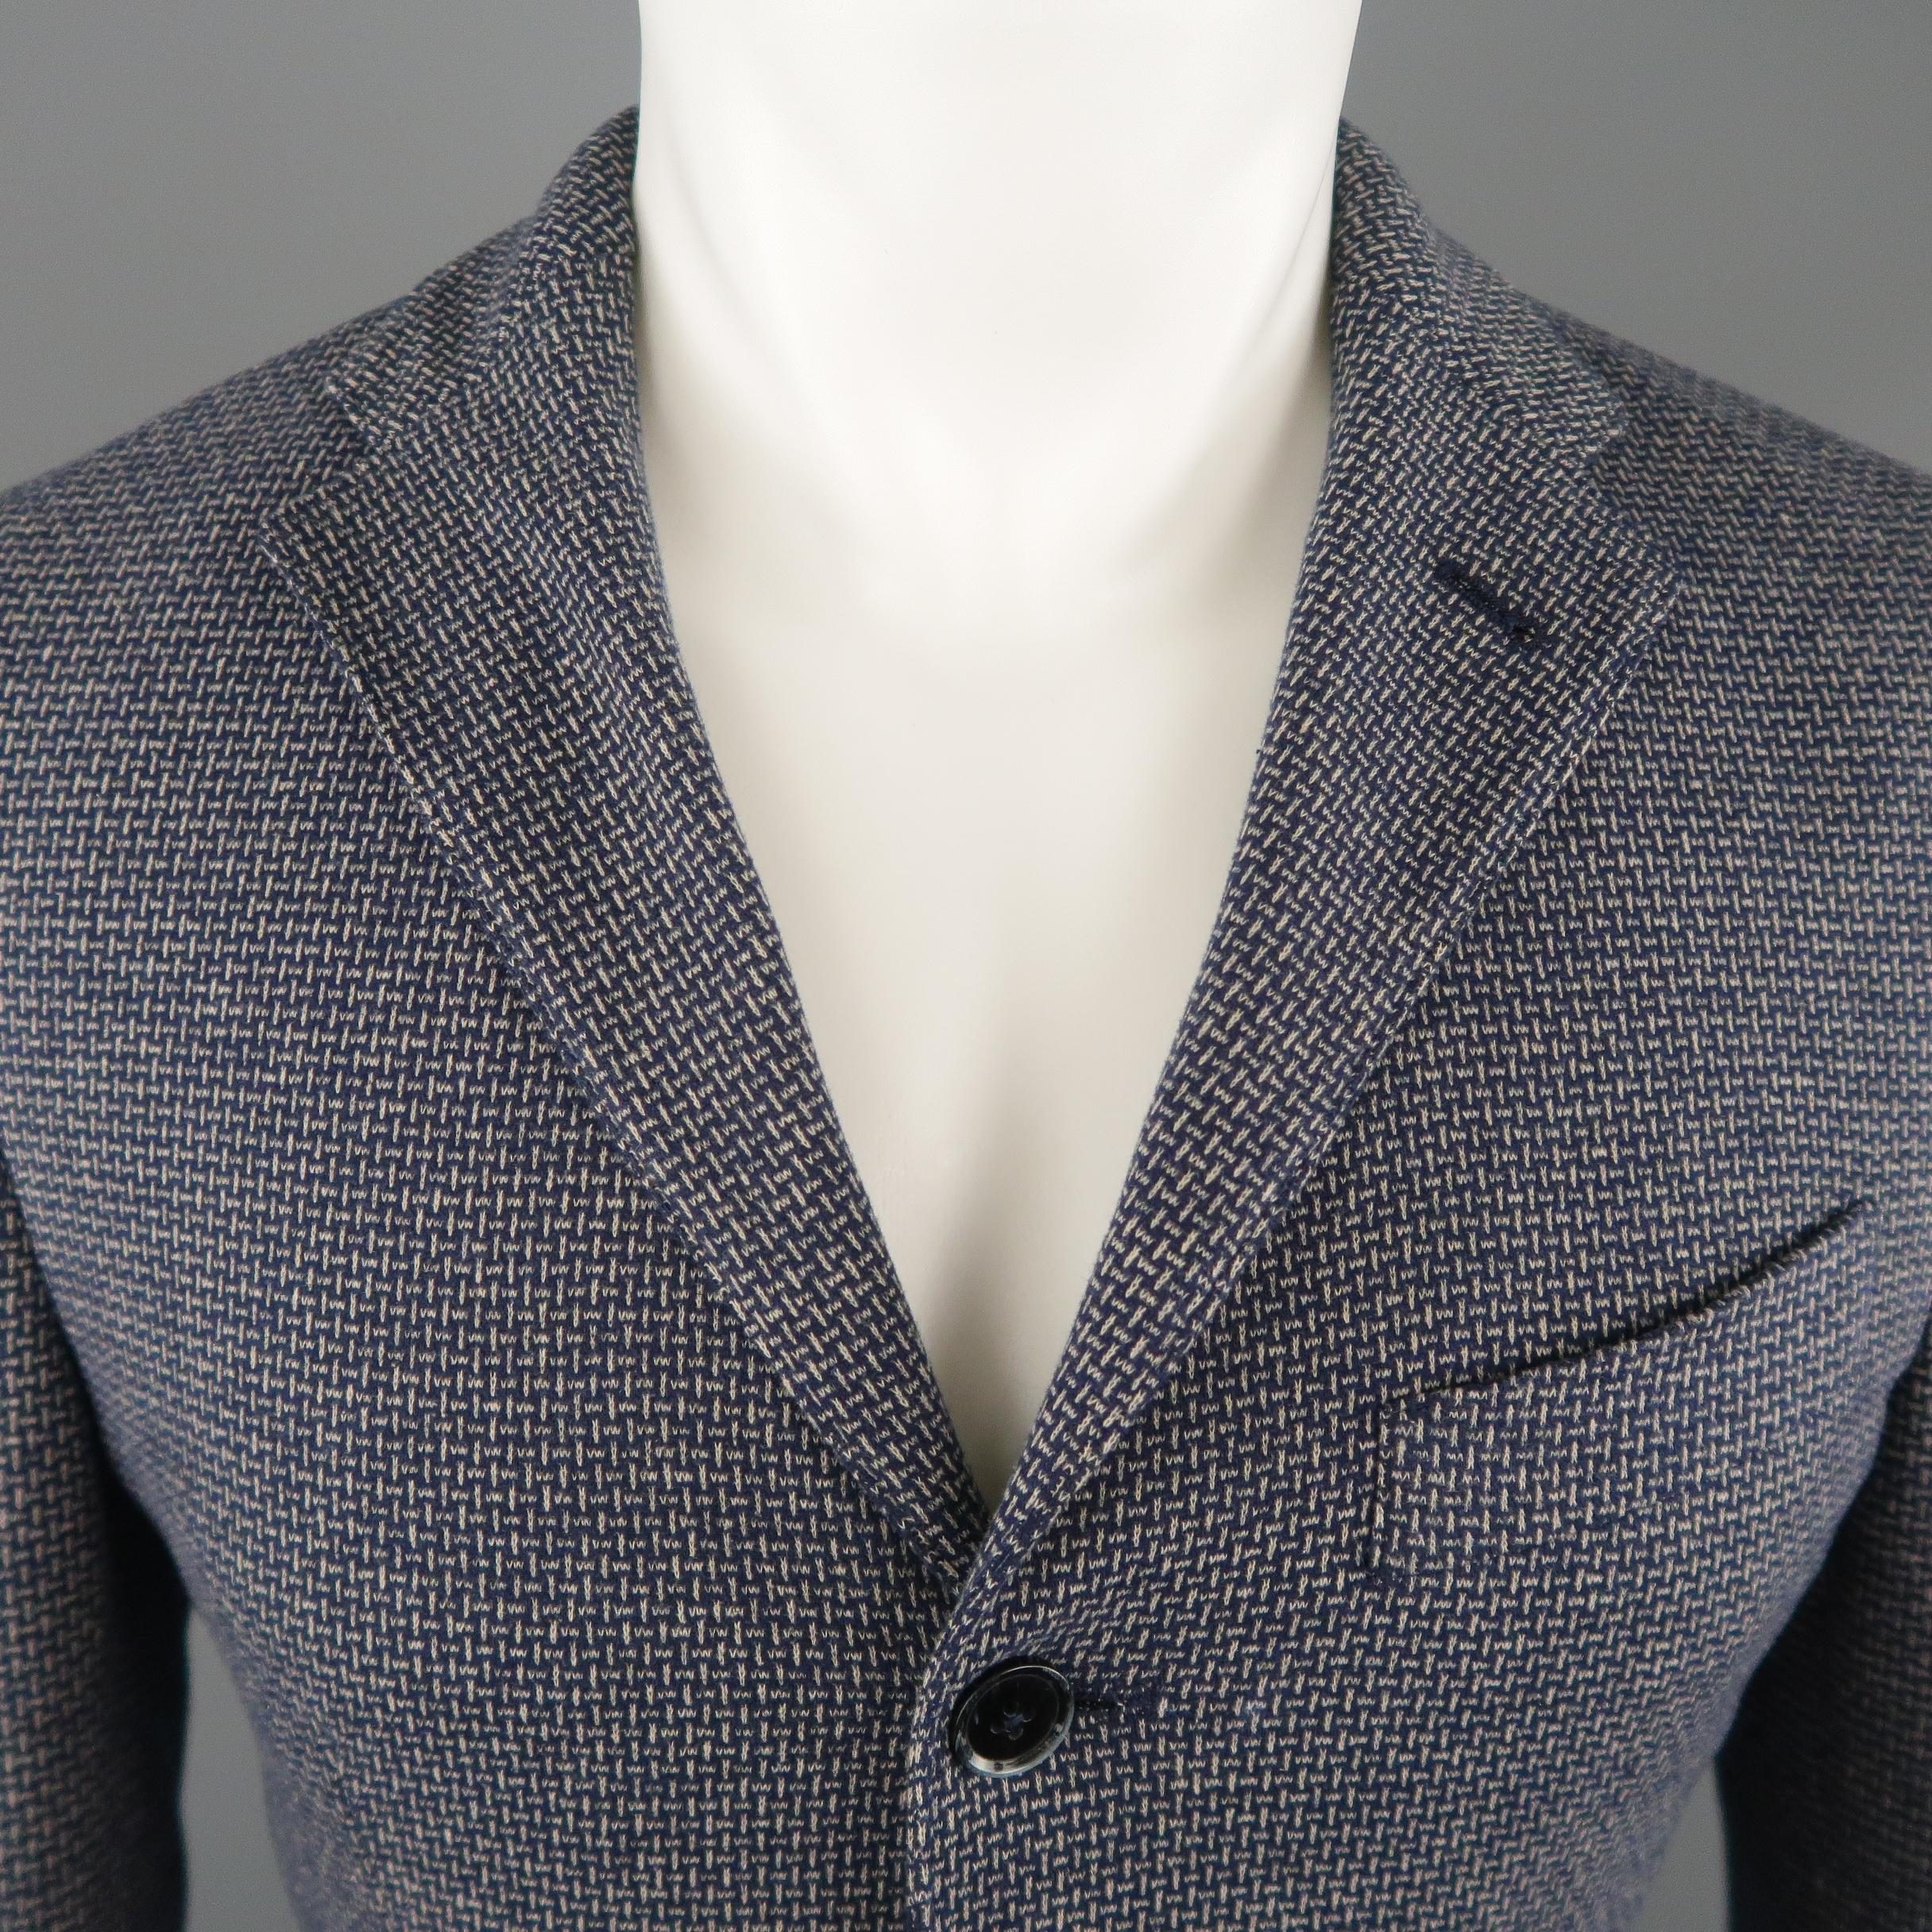 EREDI PISANO sport coat comes in a navy and gray woven print knit with a notch lapel, single breasted three button front, functional button cuffs, and patch pockets. Made in Italy.
 
Excellent Pre-Owned Condition.
Marked: IT 48
 
Measurements:
